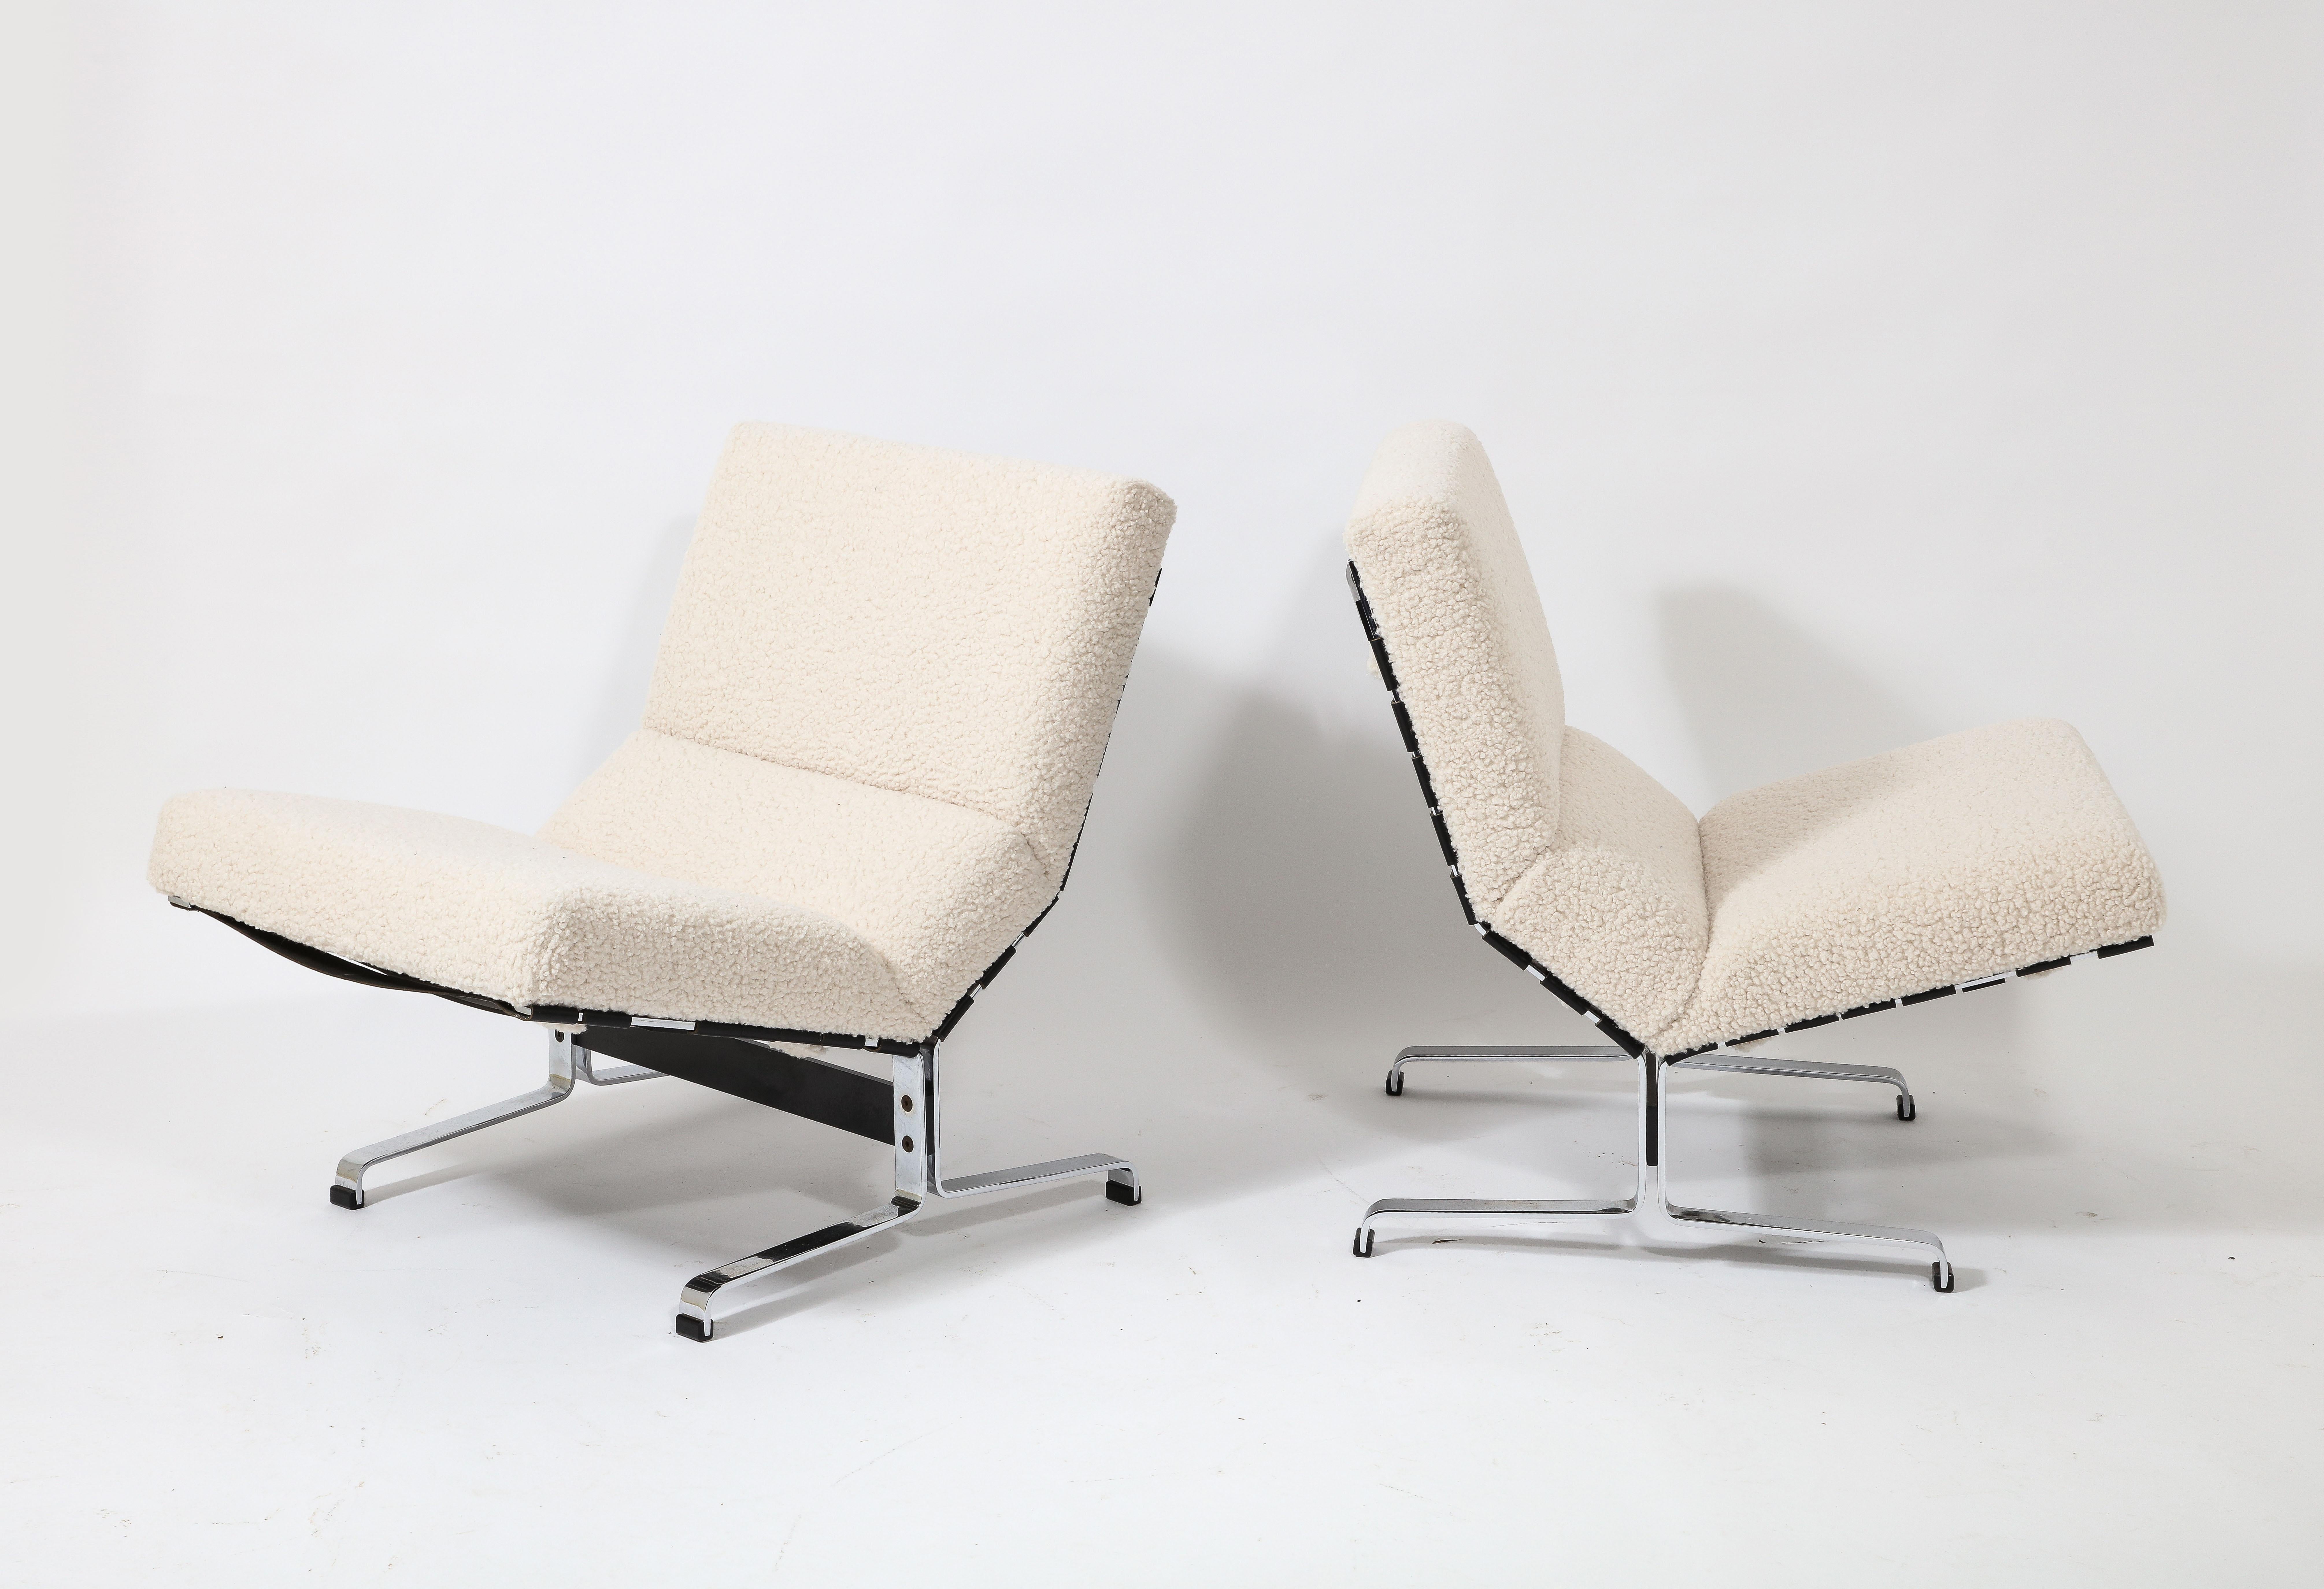 Etienne Fermigier Pair of Slipper Lounge Chairs in Cream, France 1960's For Sale 6